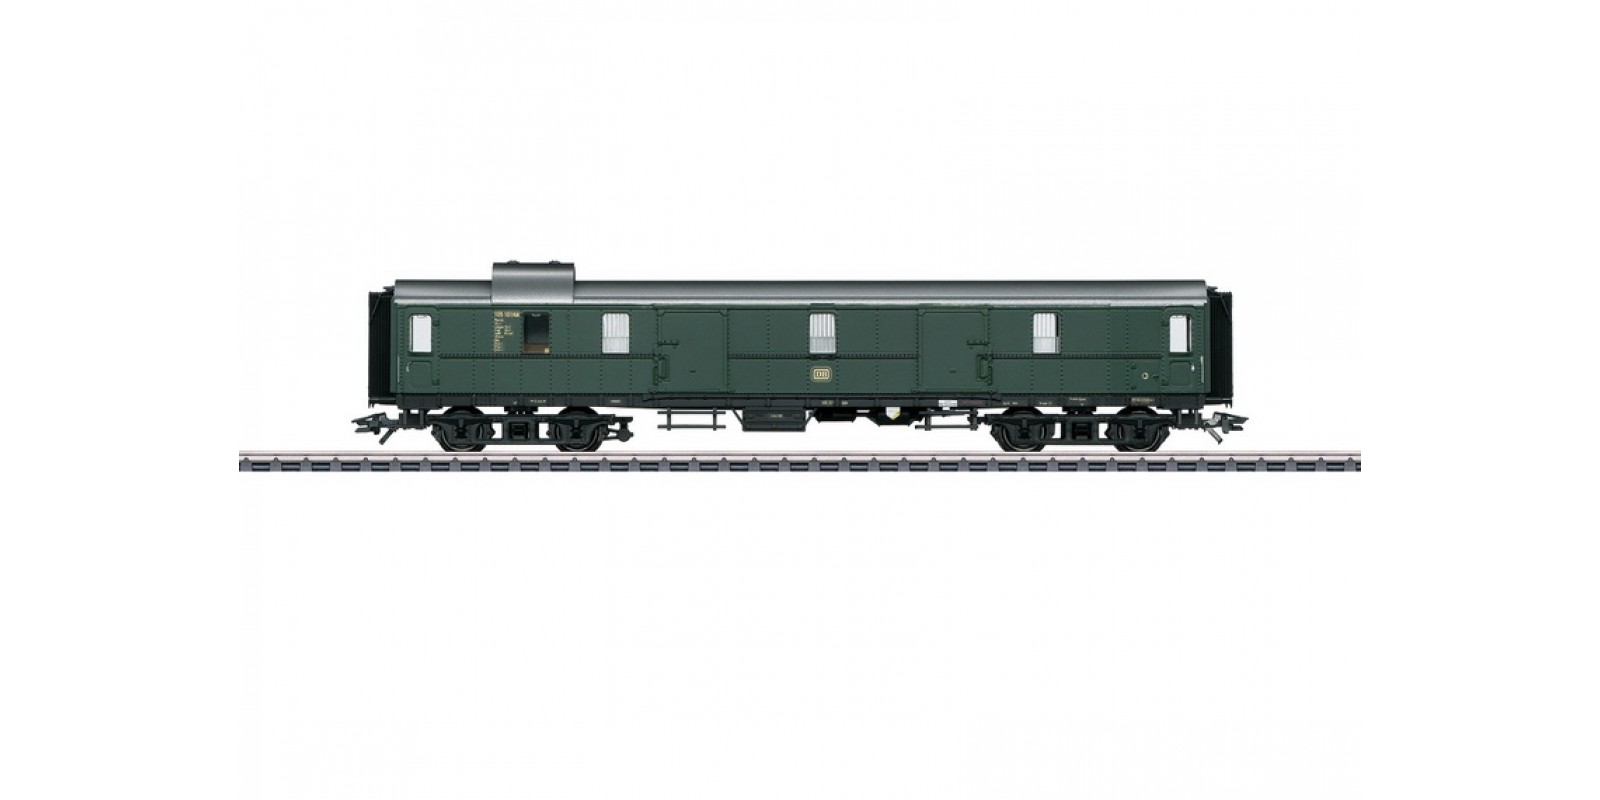 42264 "Hecht" / "Pike" Express Train Baggage Car